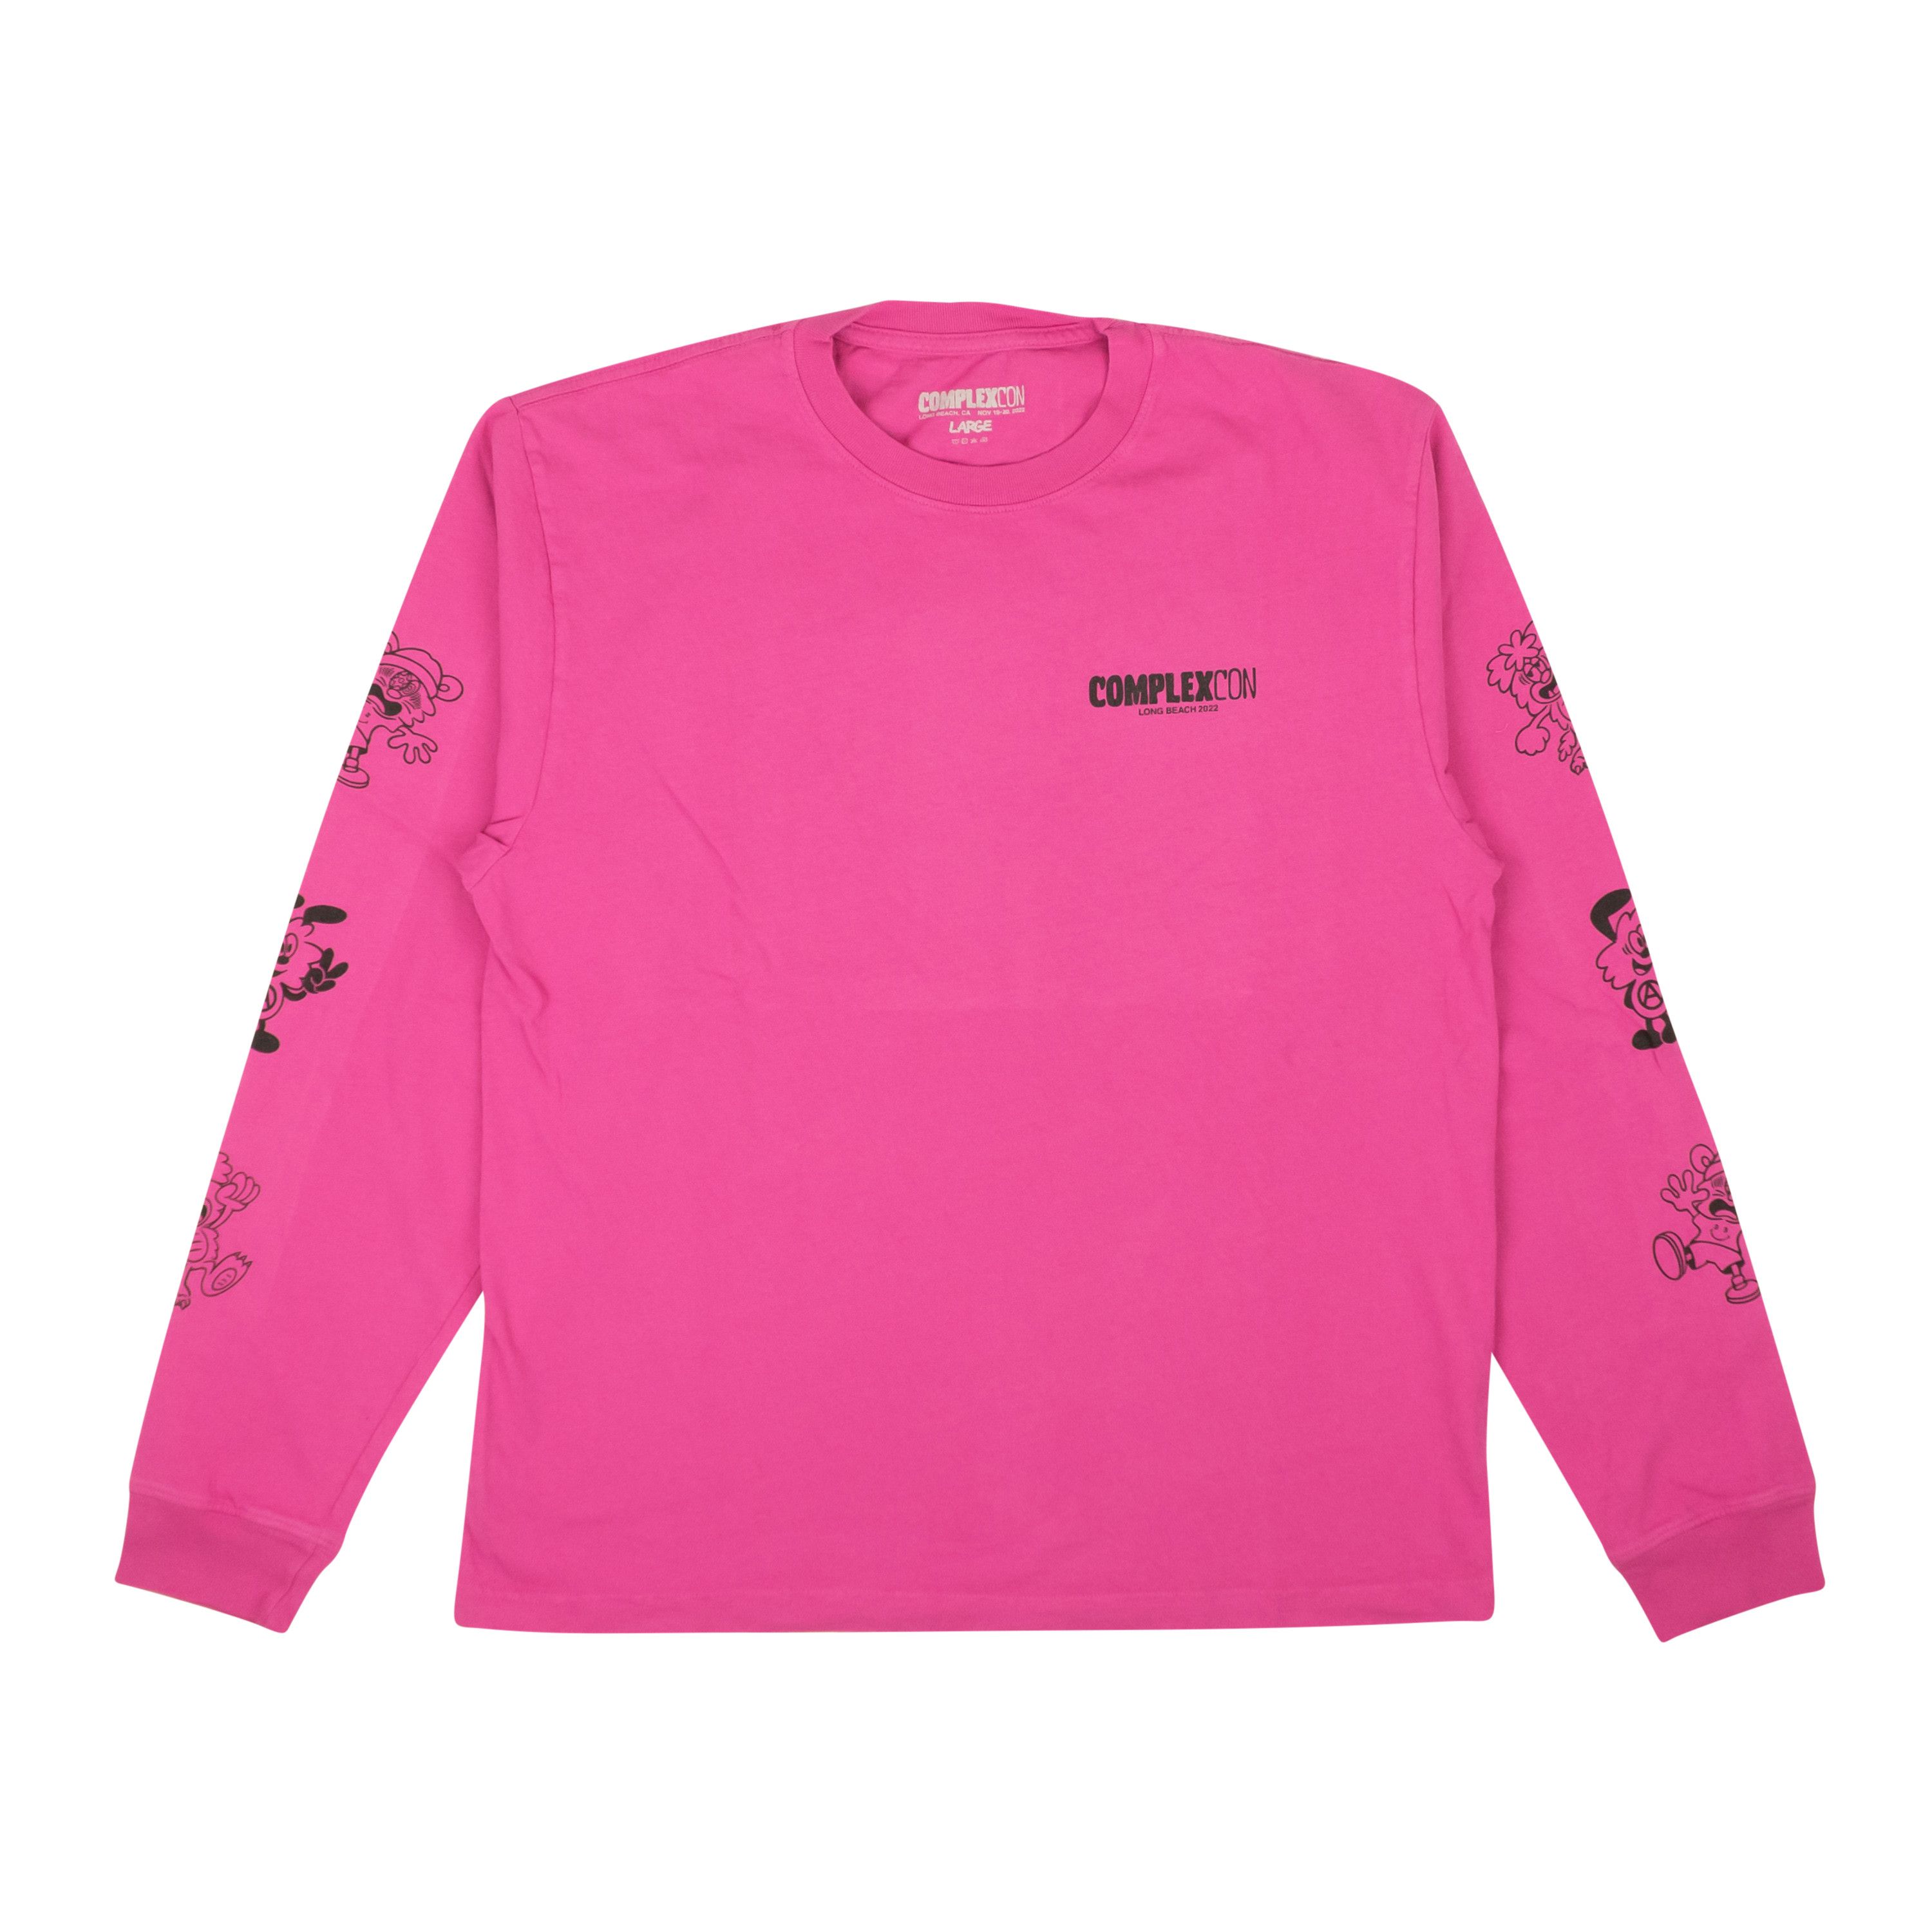 ComplexCon x Verdy Hot Pink Long Sleeve T-Shirt Size XS | Grailed